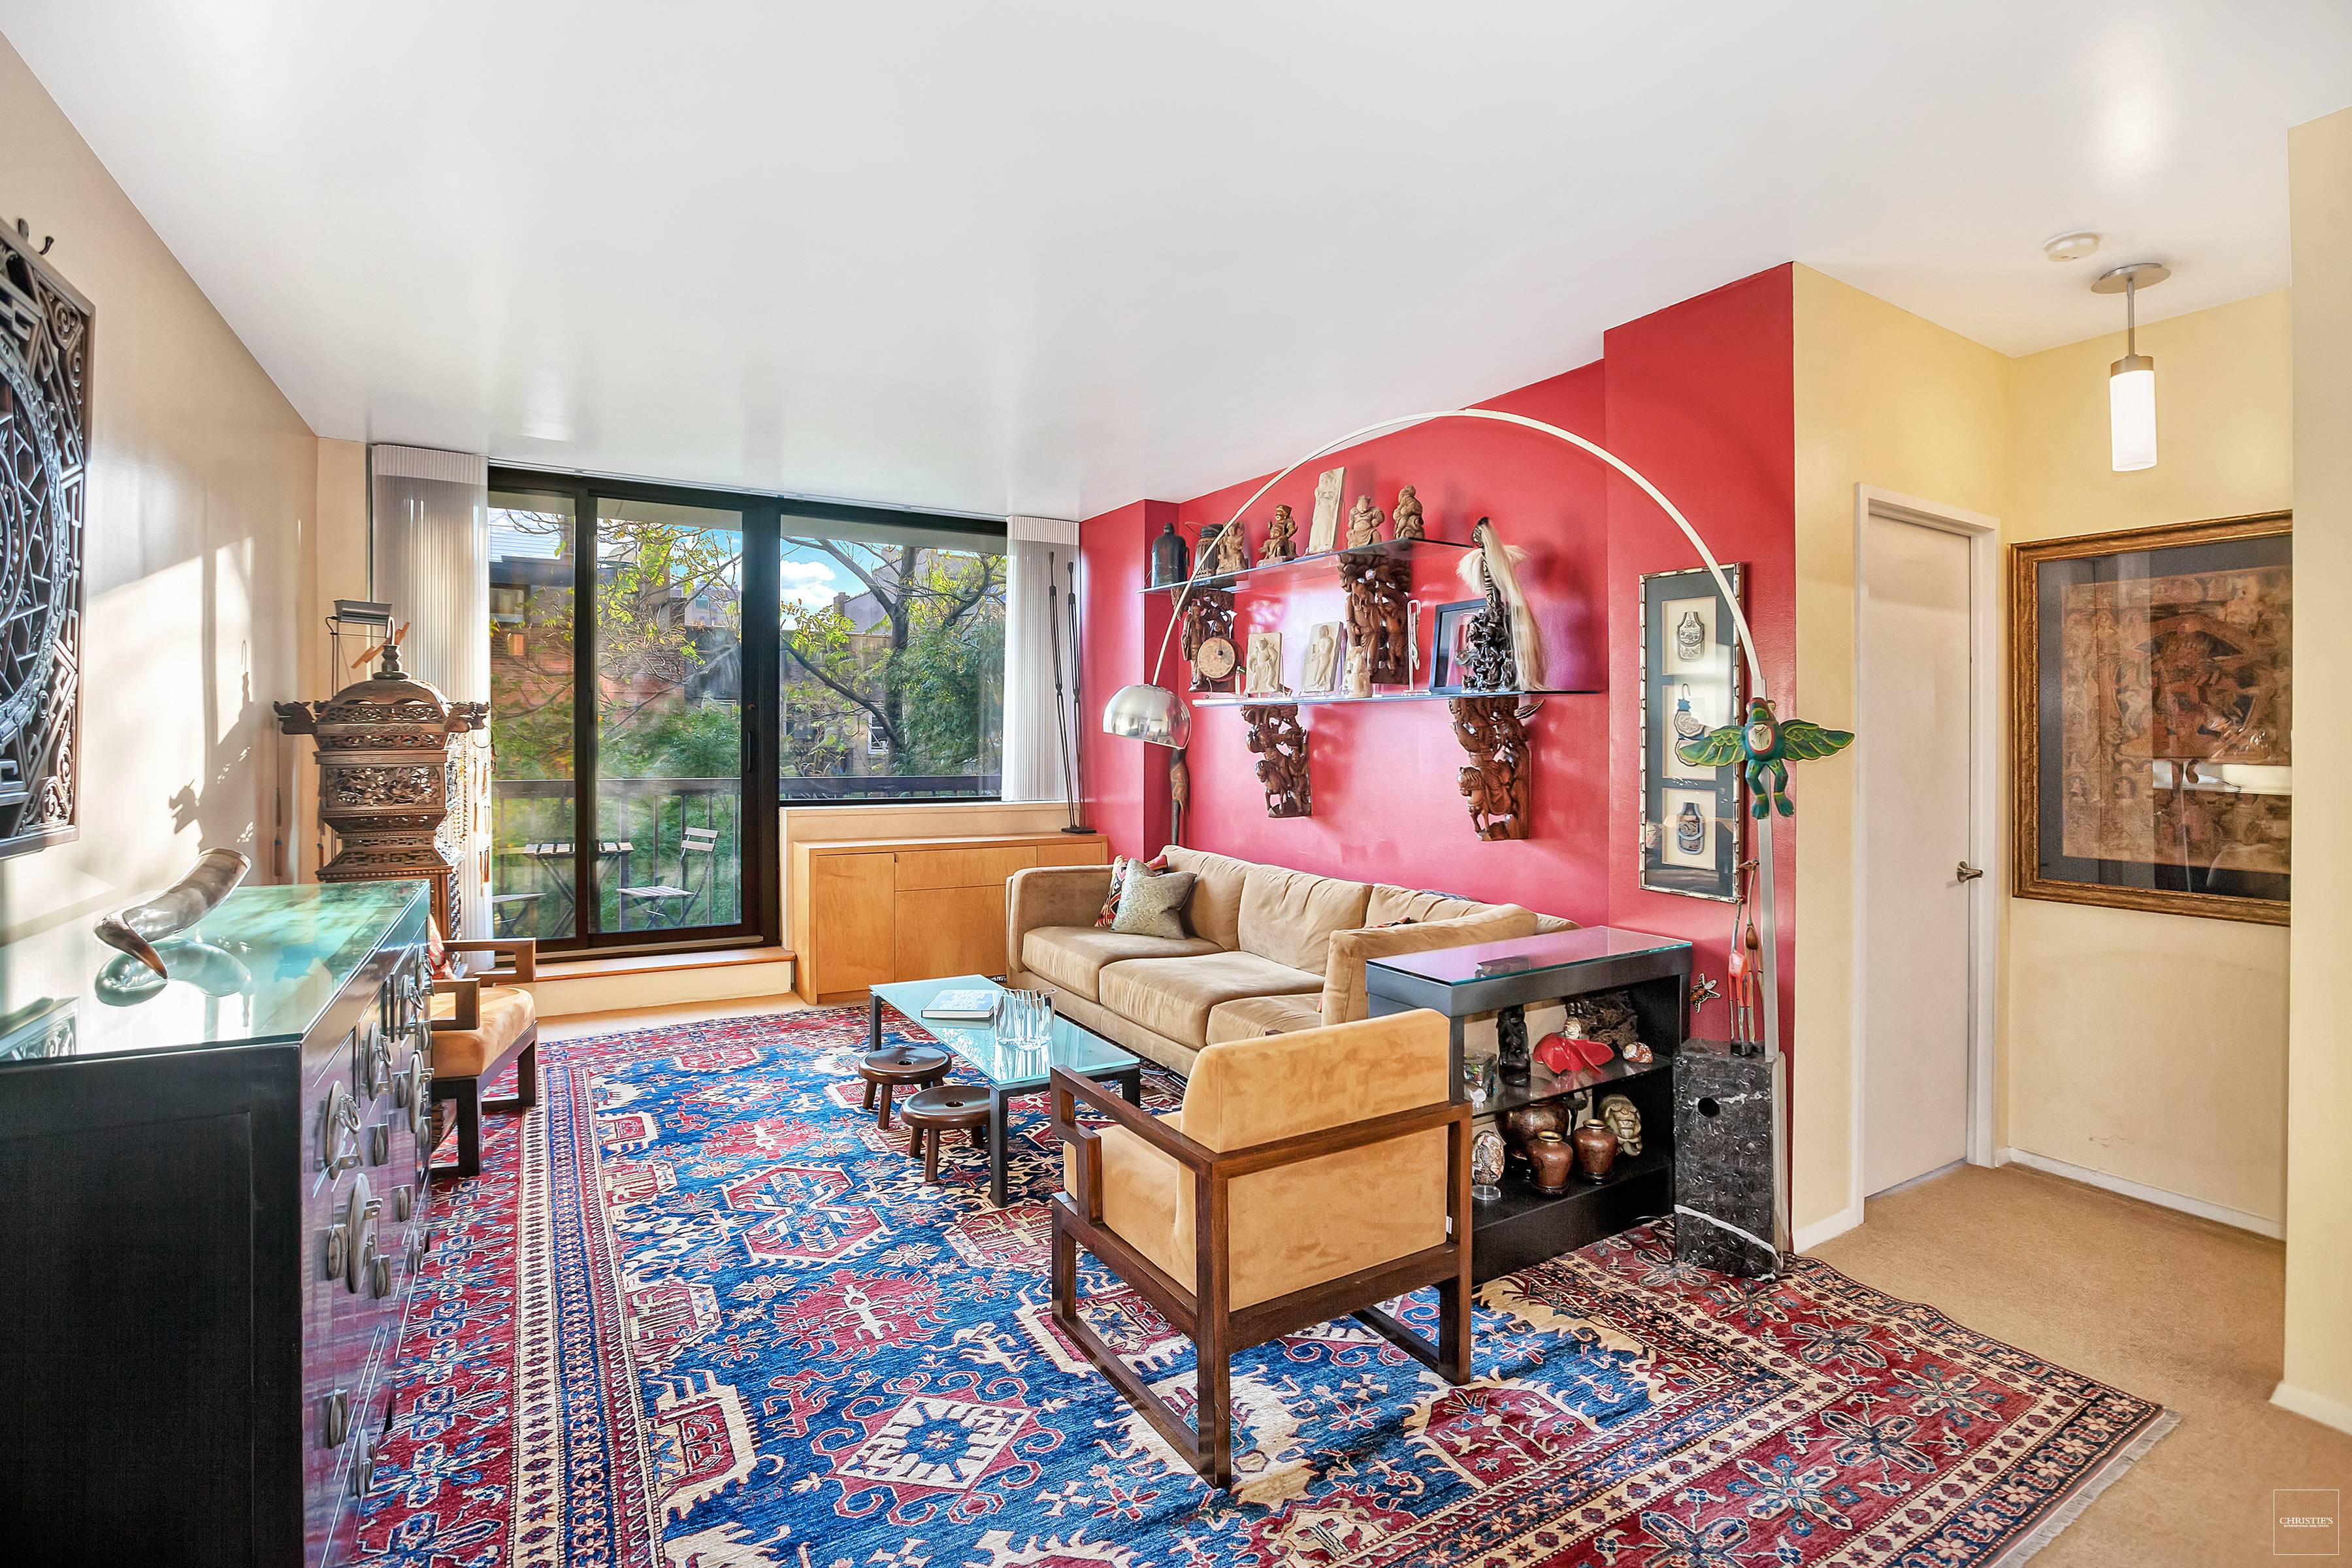 Charming One Bedroom Home in Prime Chelsea A private oasis in the heart of Manhattan, this bright and sunny apartment has large format windows overlooking the gardens and greenery.